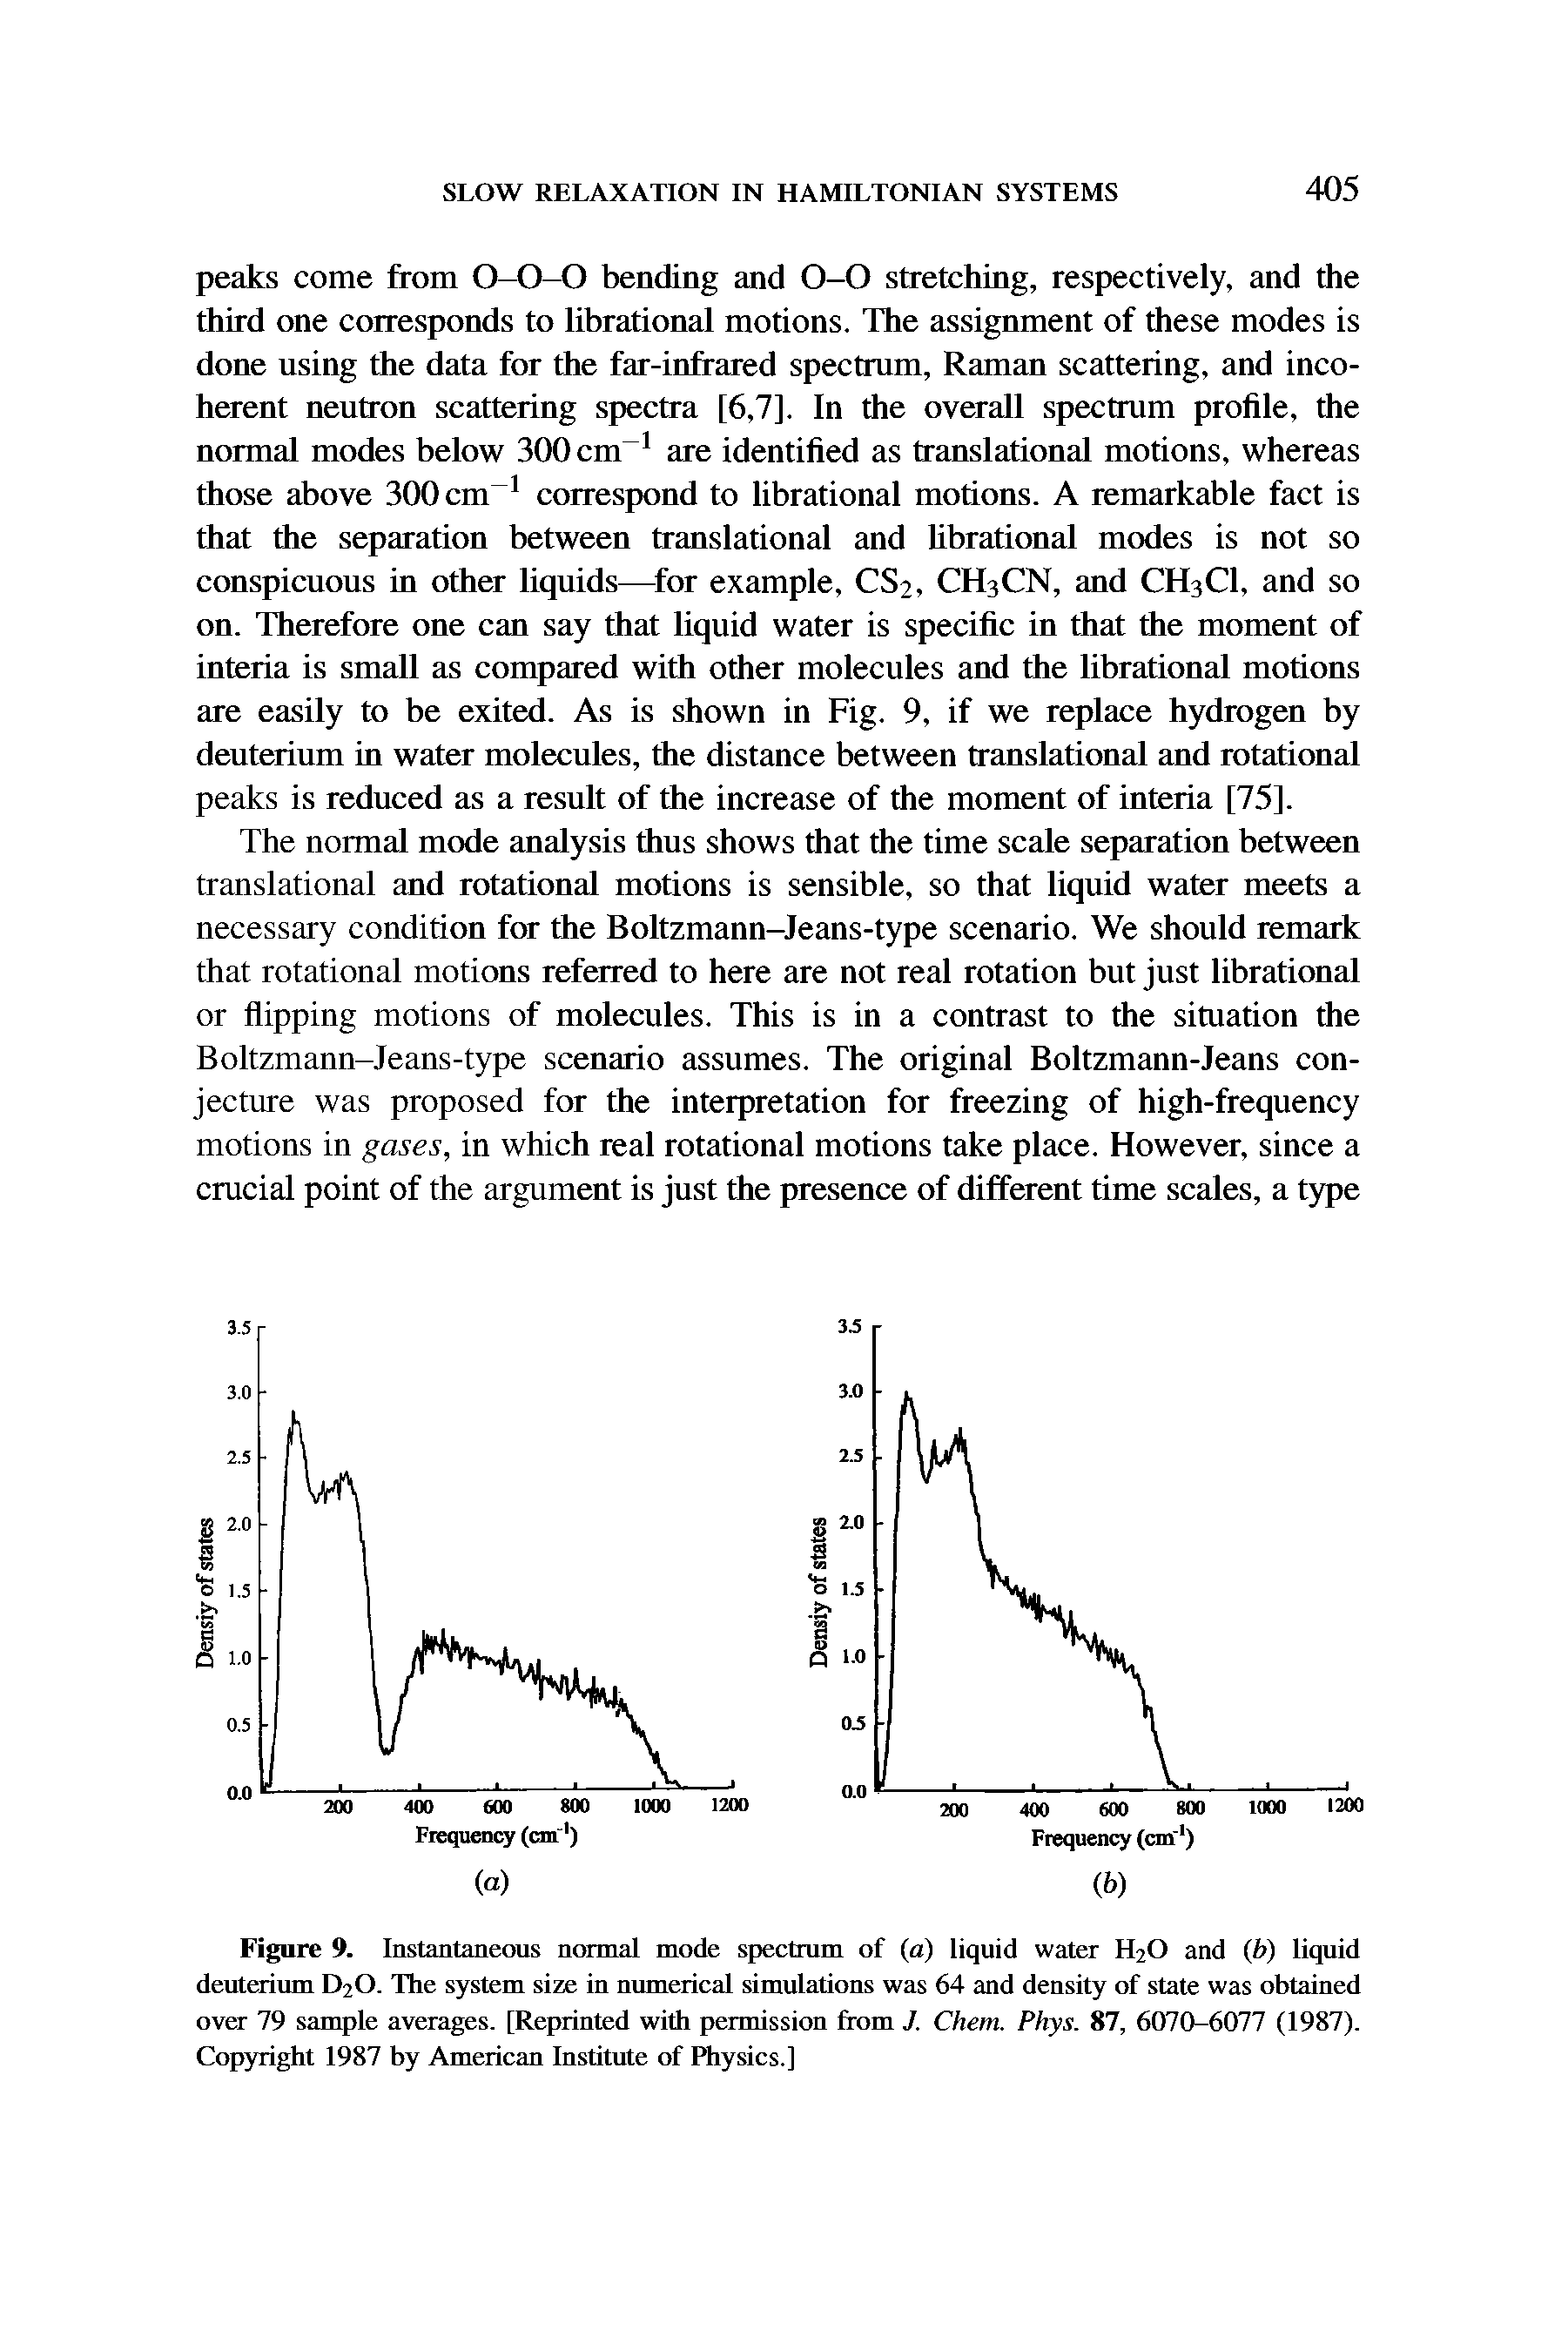 Figure 9. Instantaneous normal mode spectrum of (a) liquid water H2O and (b) liquid deuterium D2O. The system size in numerical simulations was 64 and density of state was obtained over 79 sample averages. [Reprinted with permission from J. Chem. Phys. 87, 6070-6077 (1987). Copyright 1987 by American Institute of Physics.]...